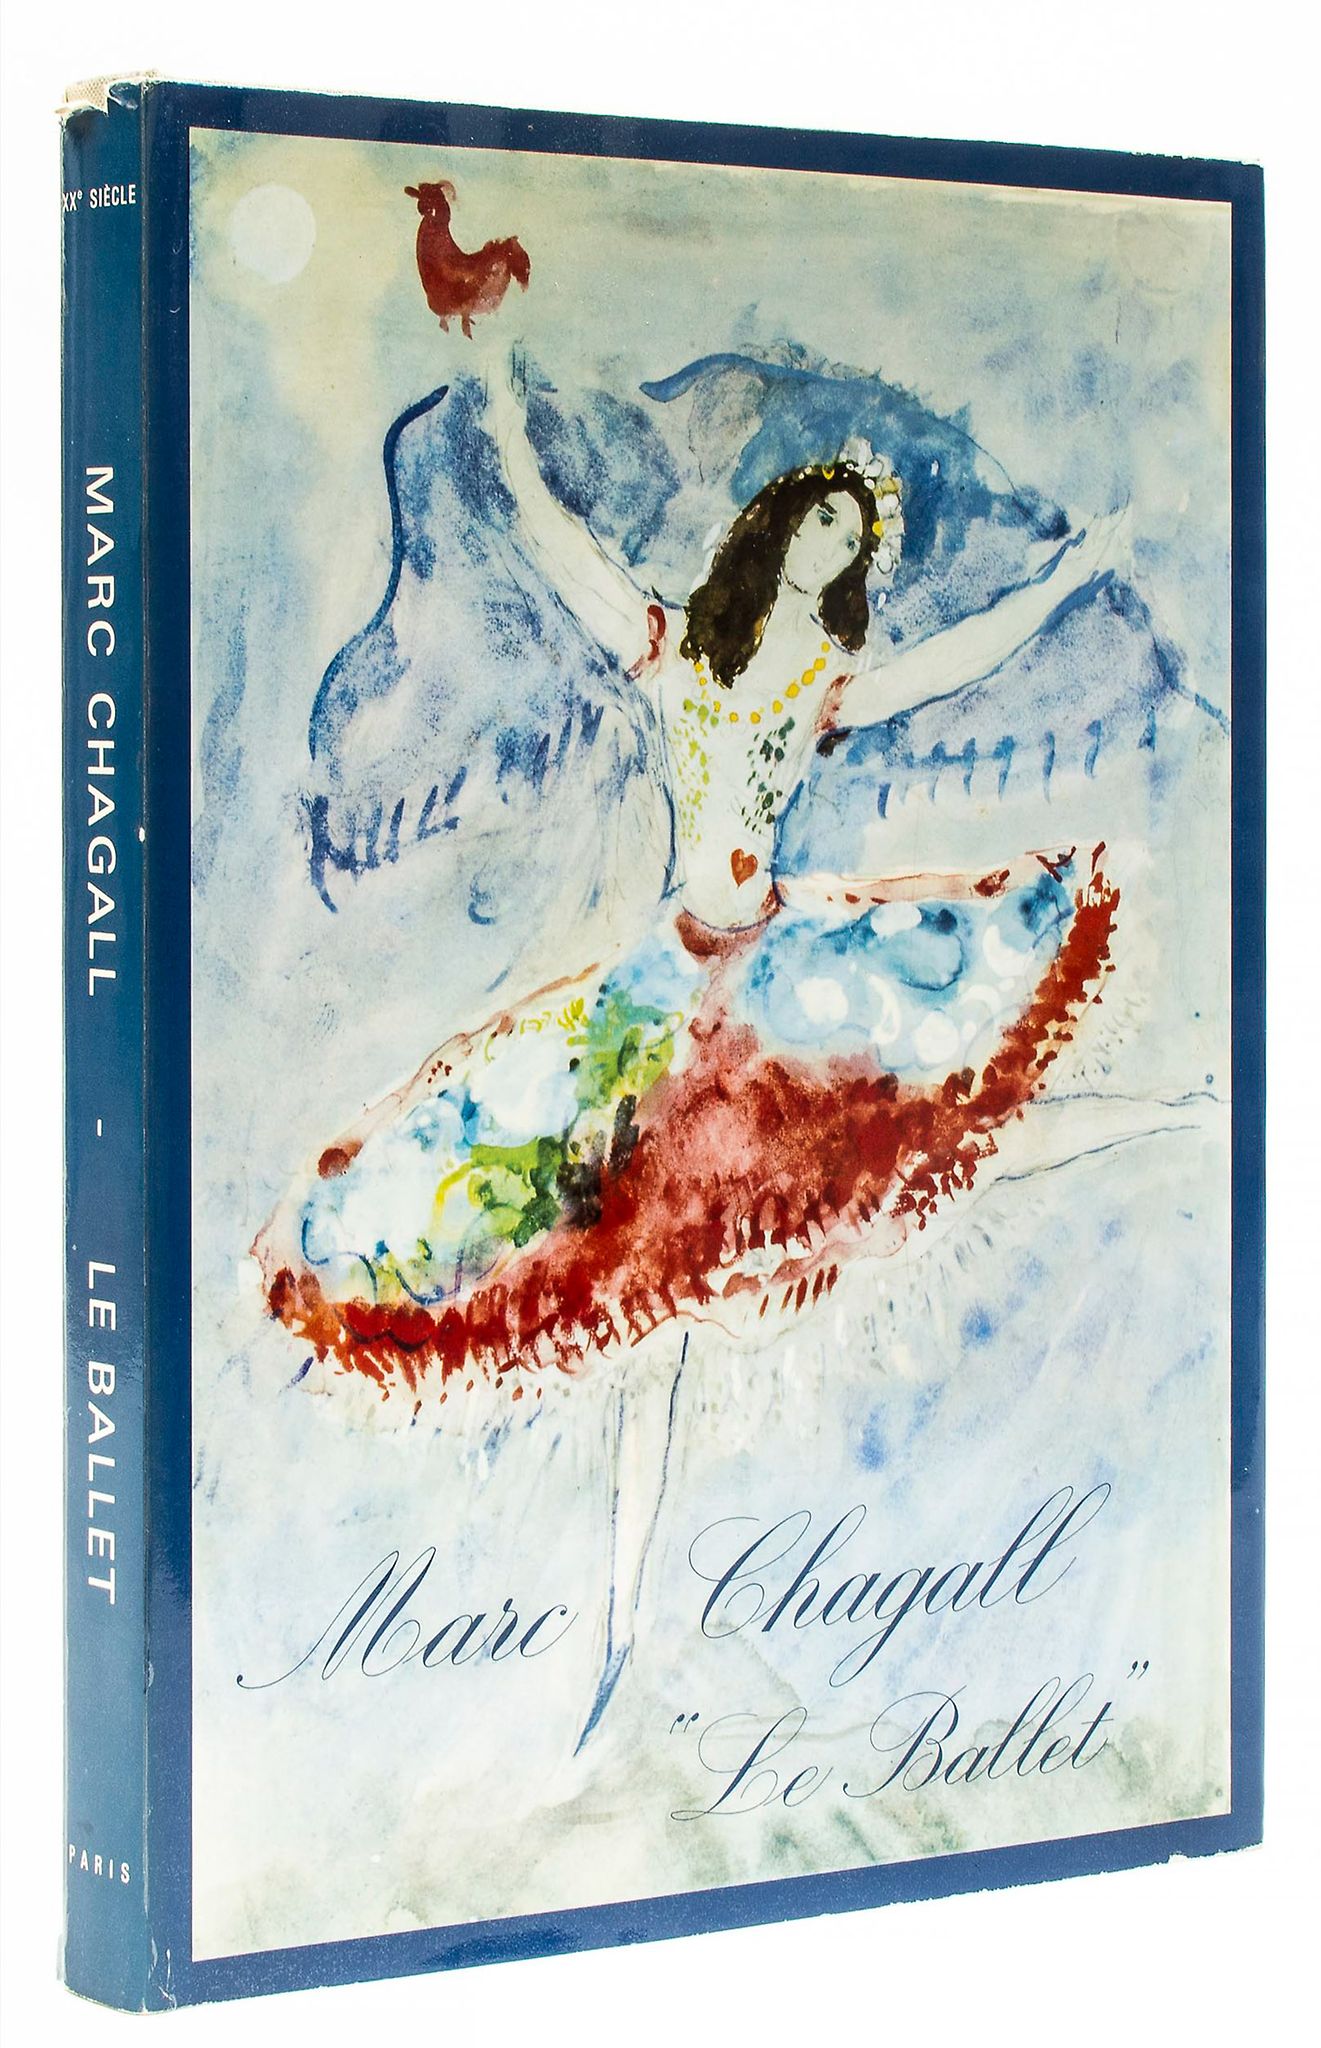 Marc Chagall (1887-1985) - Le Ballet (C.78) the book, 1969, comprising one lithograph printed in